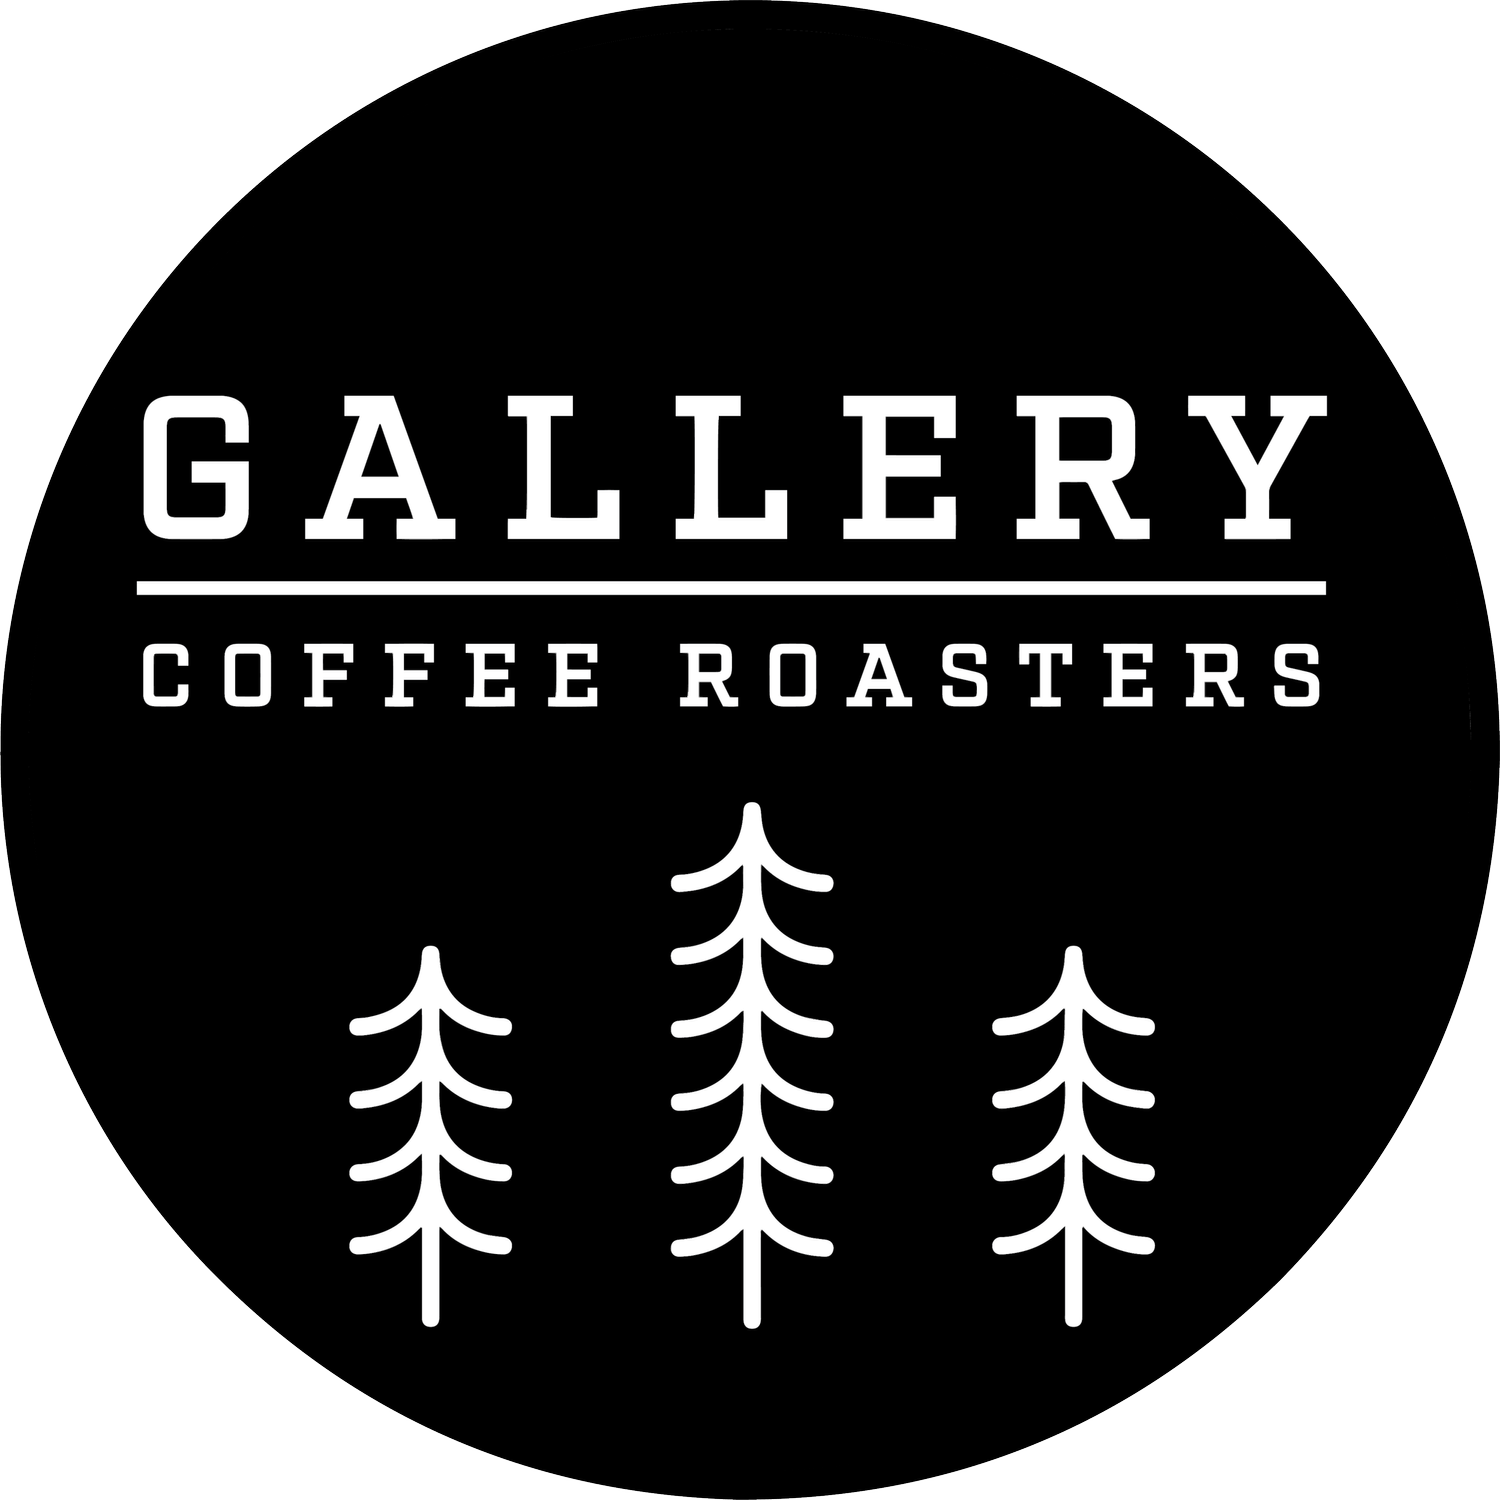 Gallery Coffees